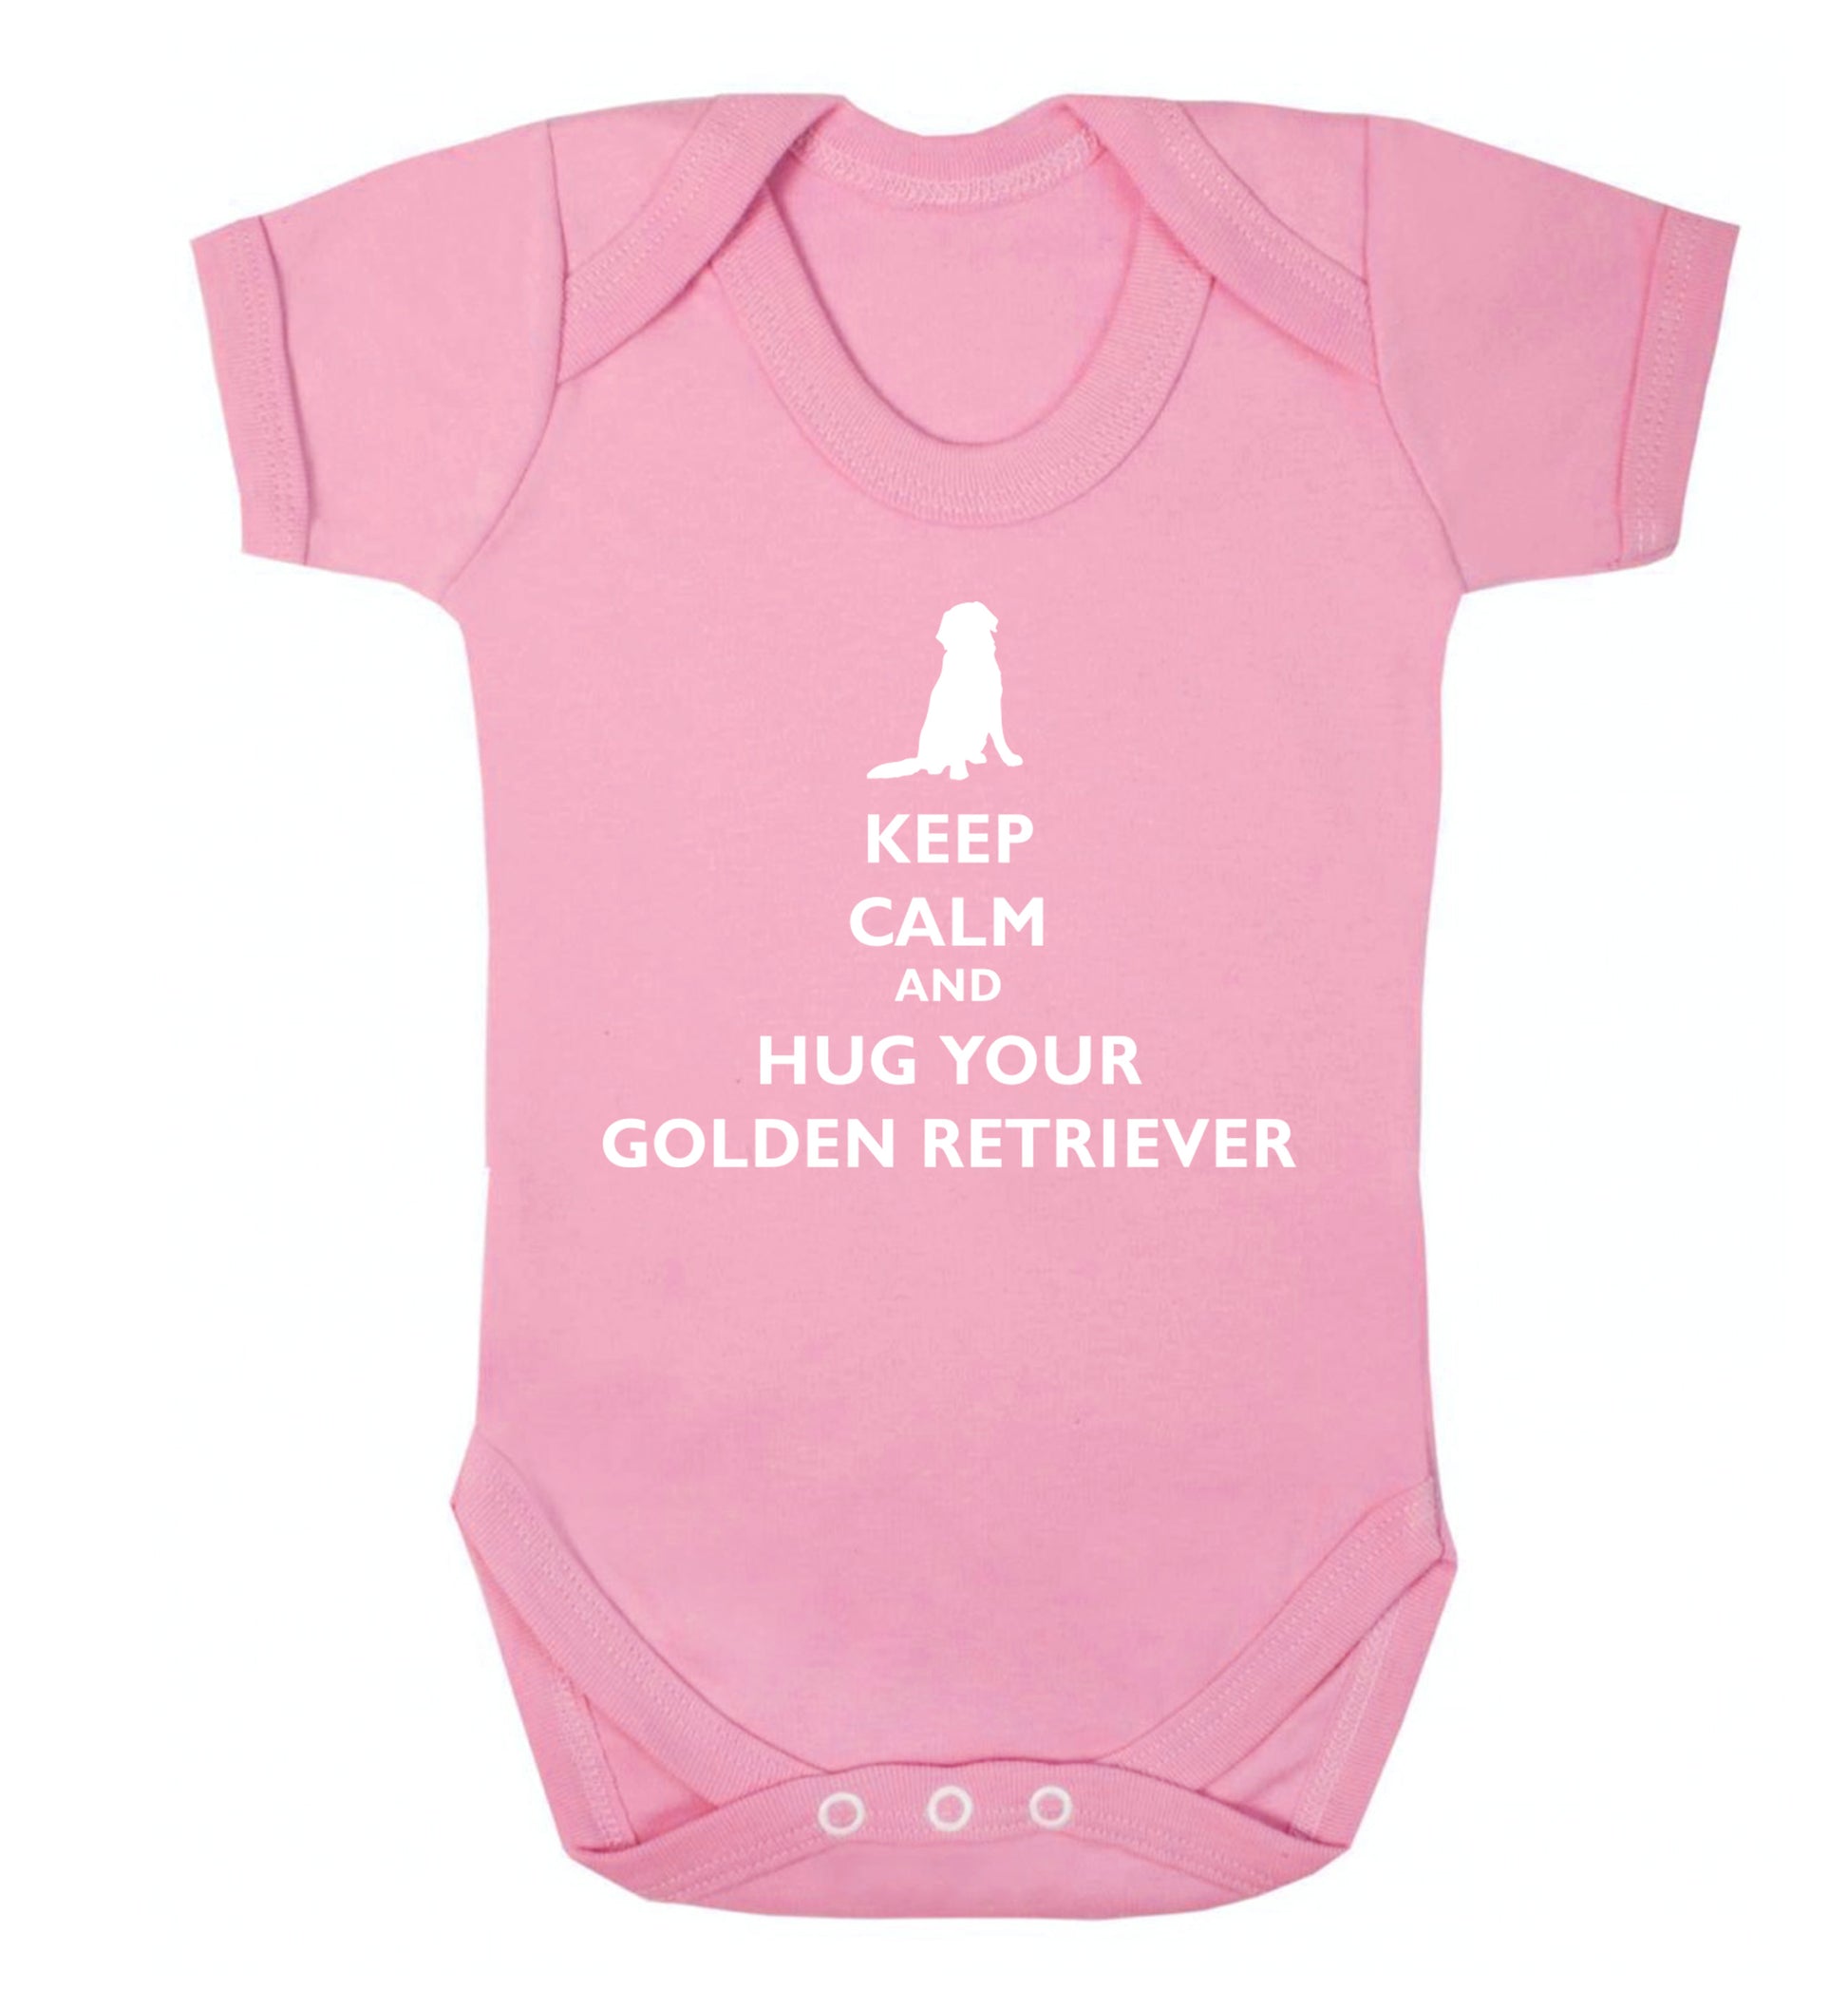 Keep calm and hug your golden retriever Baby Vest pale pink 18-24 months